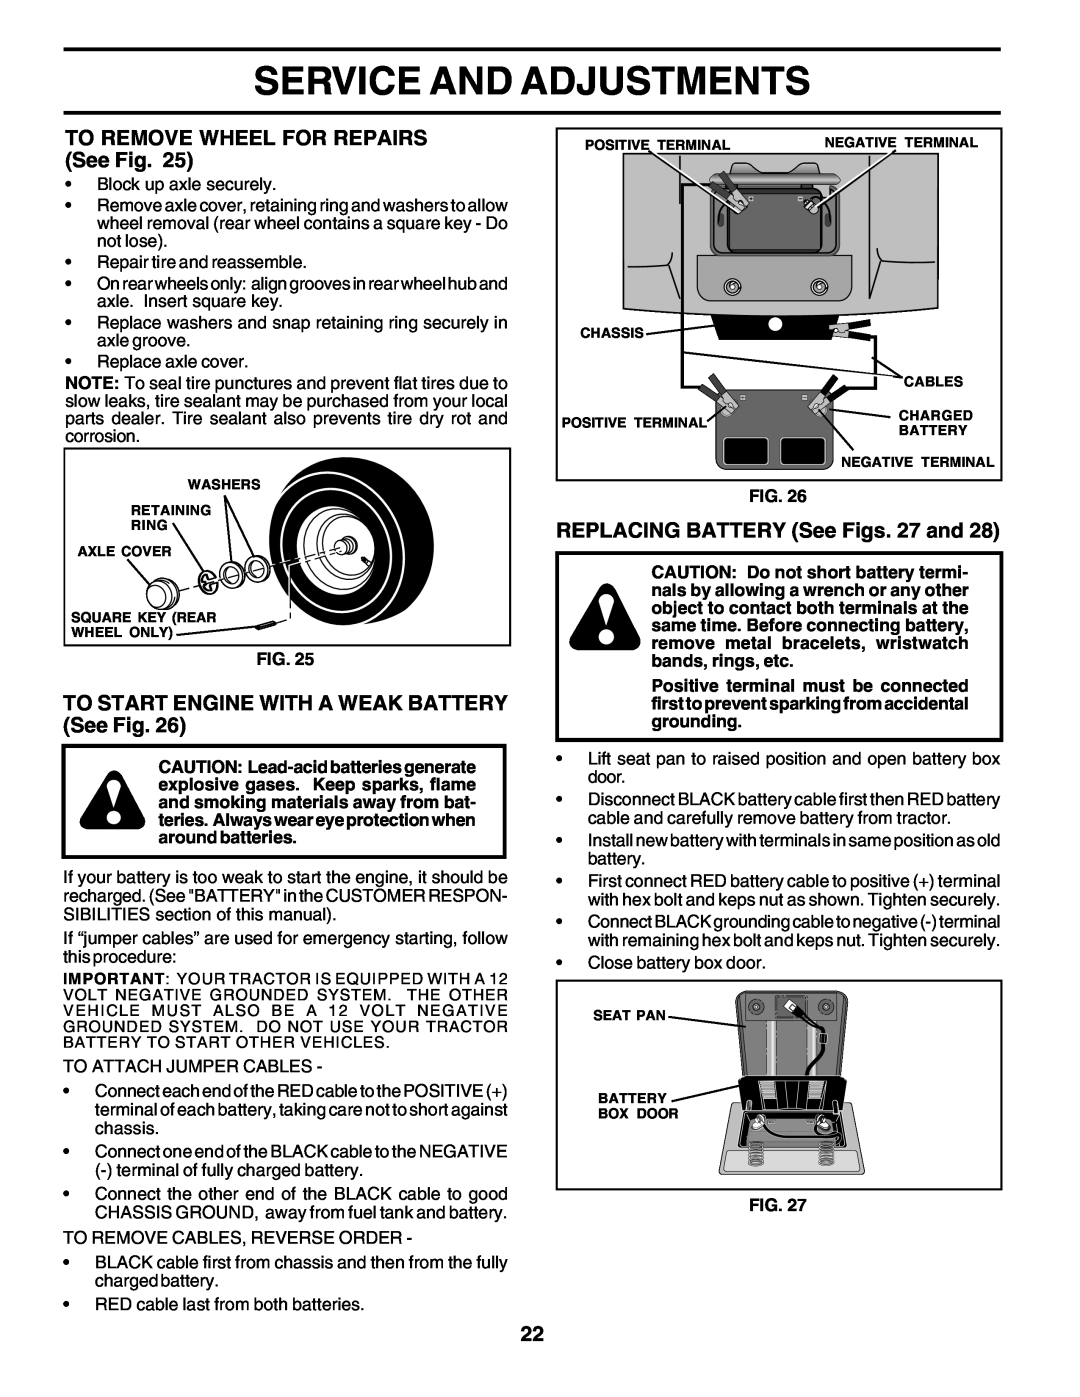 Weed Eater 178704 manual Service And Adjustments, TO REMOVE WHEEL FOR REPAIRS See Fig, REPLACING BATTERY See Figs. 27 and 